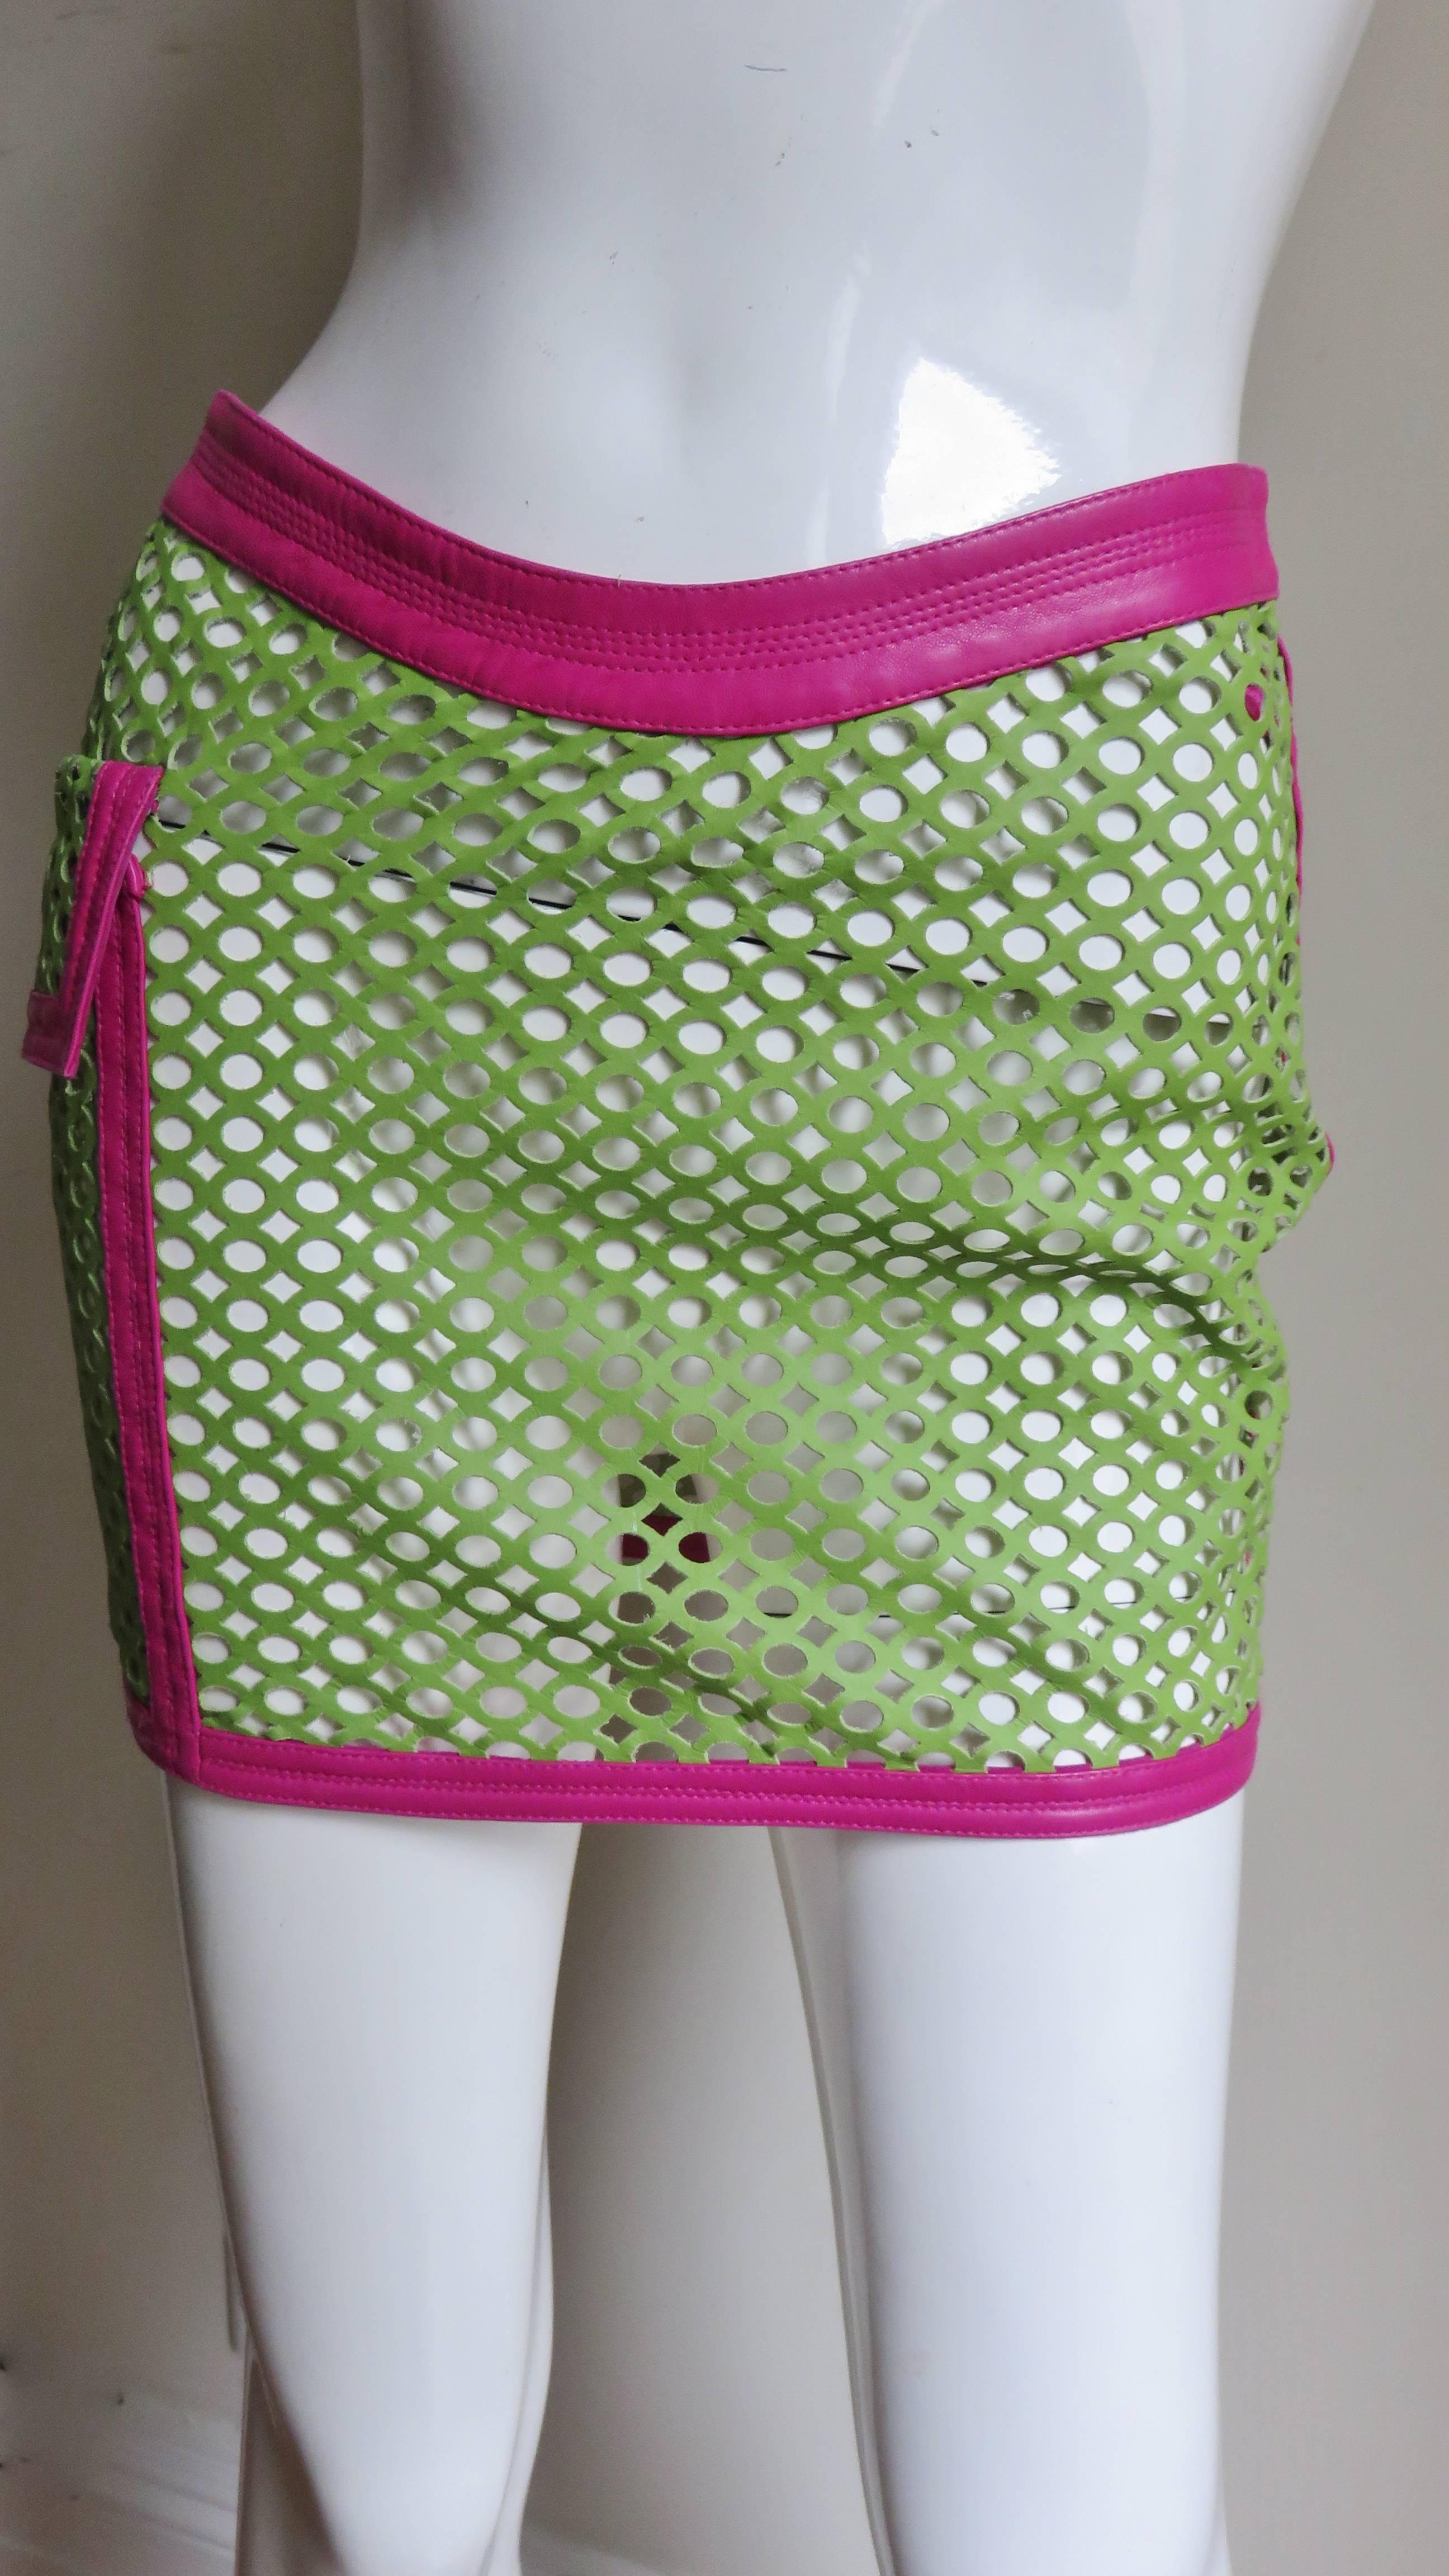 A perforated leather skirt in apple green trimmed in bright pink leather by Gianni Versace. The skirt has a curved waistband and a large functional flap patch pocket on one side framed in pink leather as is the hem, side seams and waistband. It has